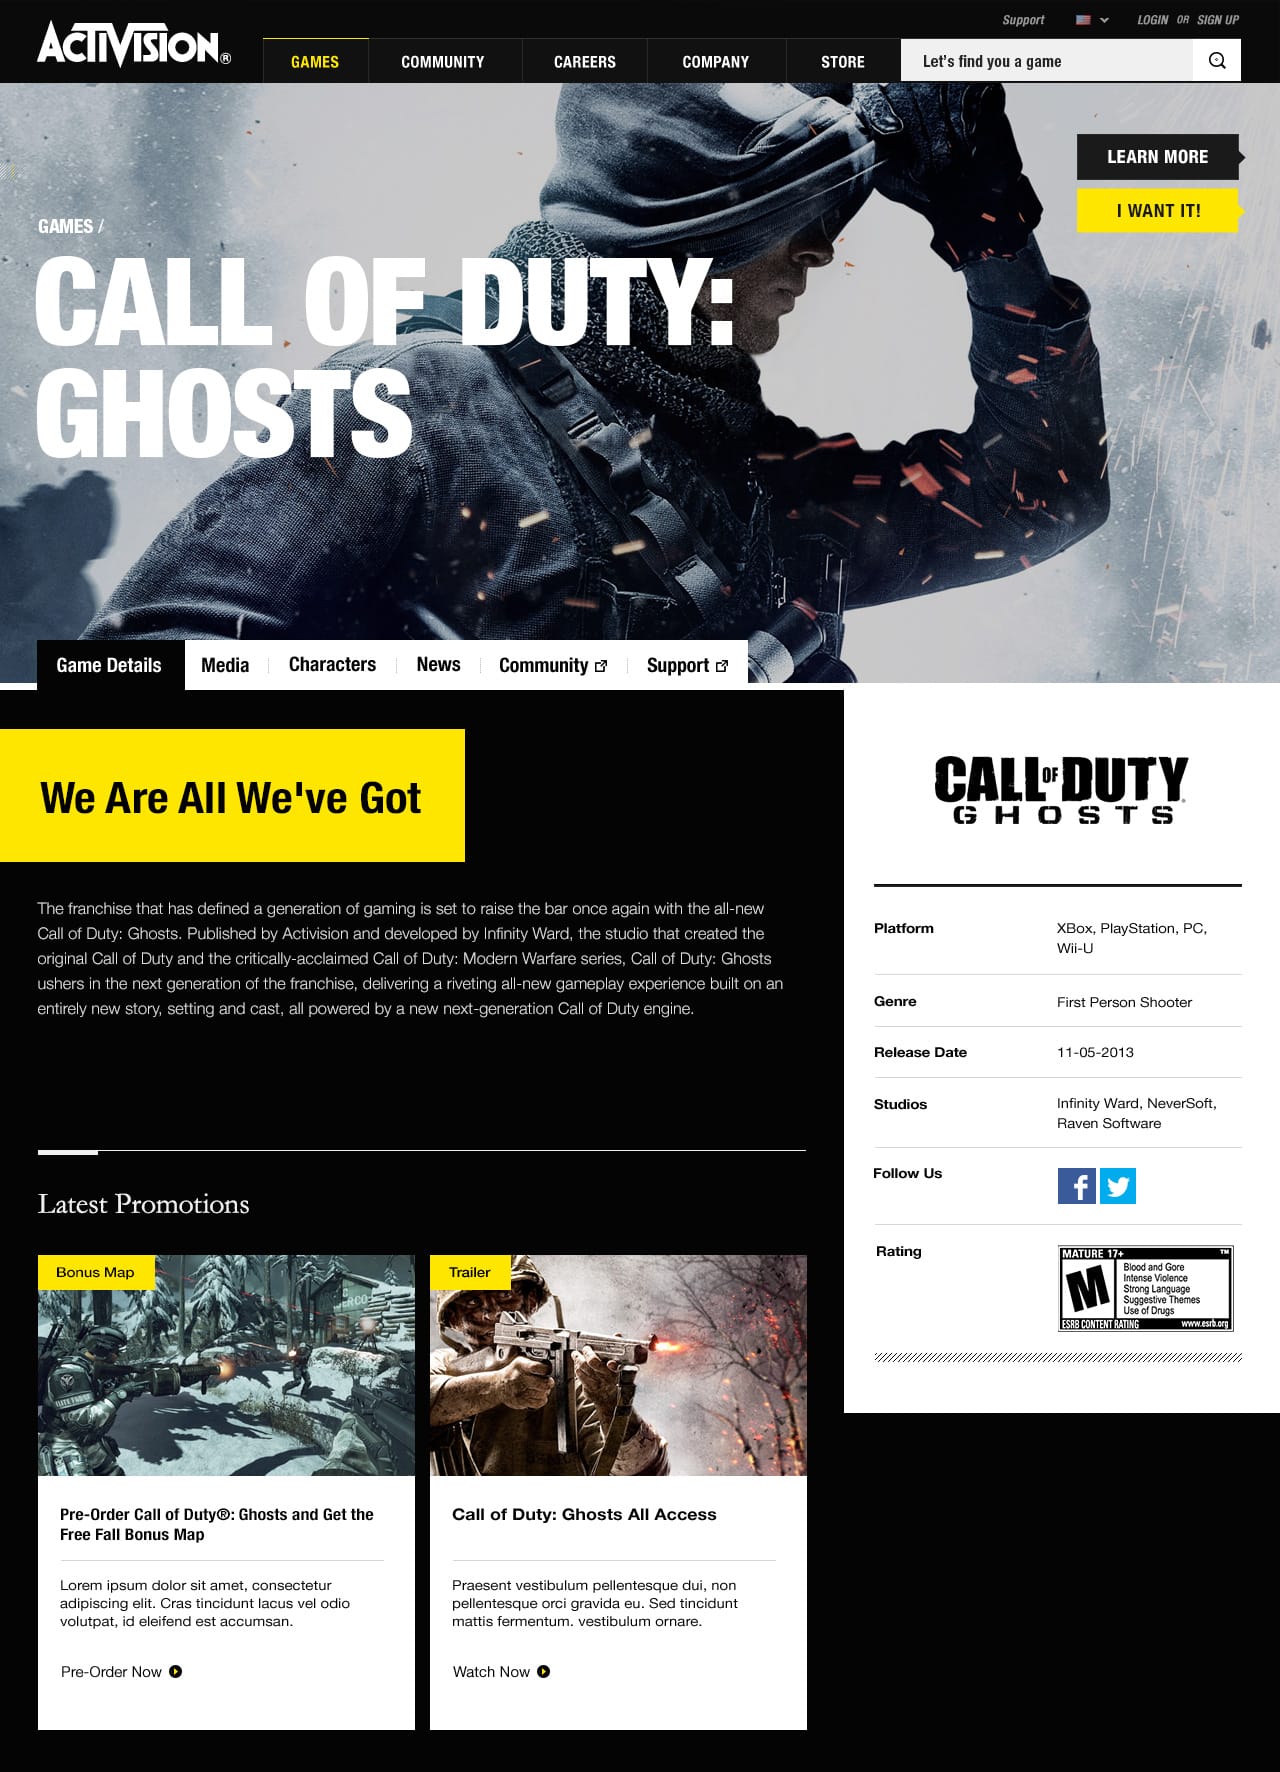 Activision_Games_Detail_Ghosts